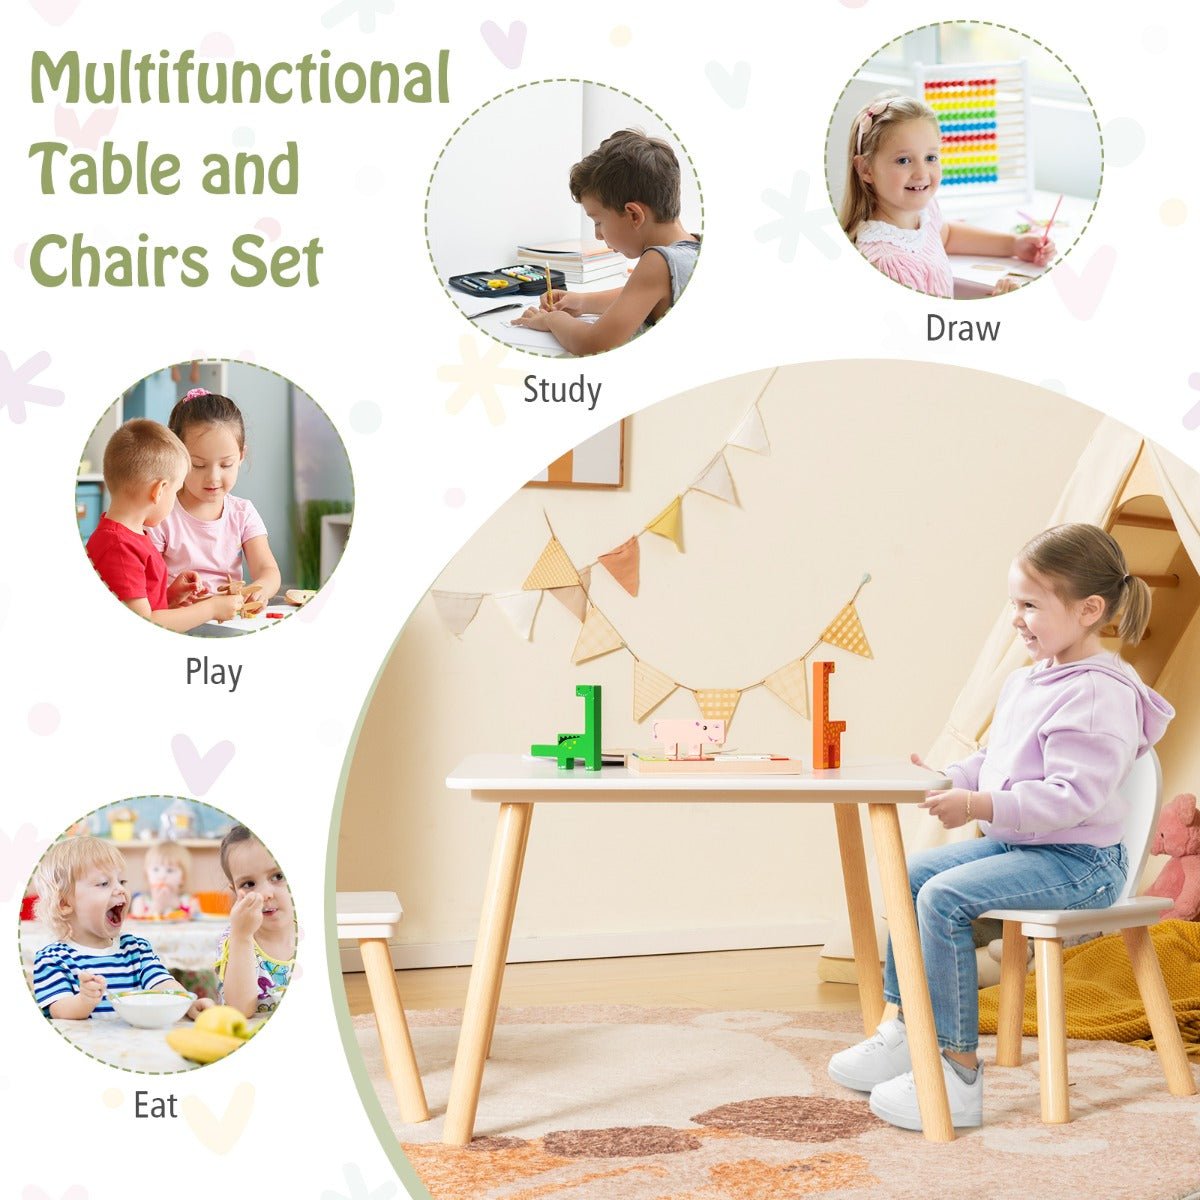 White Bunny-Eared Chairs and Grey Table Set for Crafty Kids - Kids Mega Mart